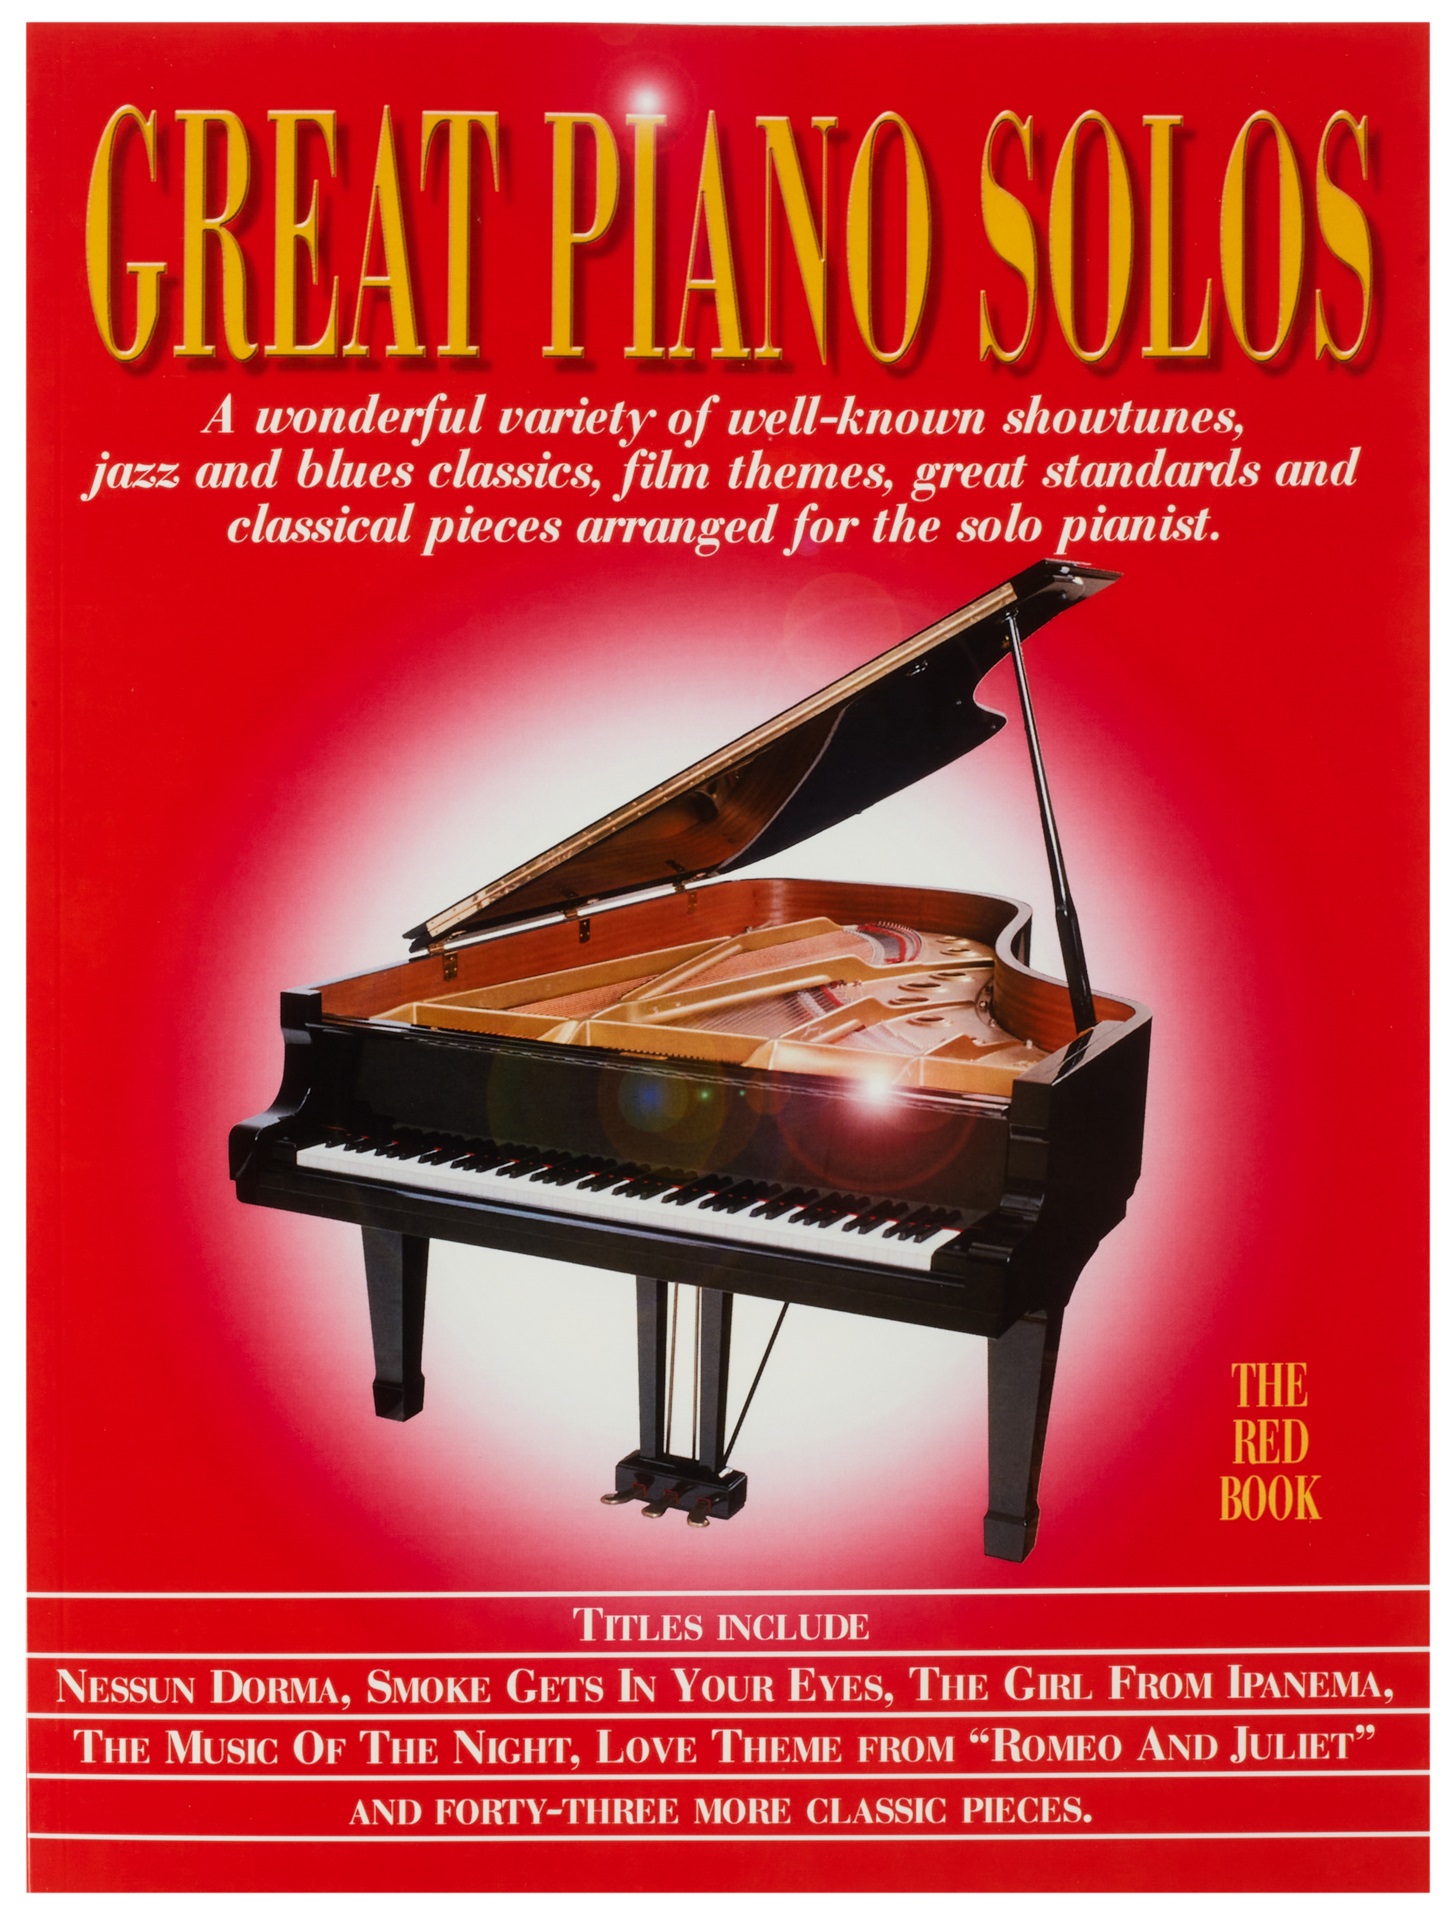 Fotografie MS Great Piano Solos - The Red Book